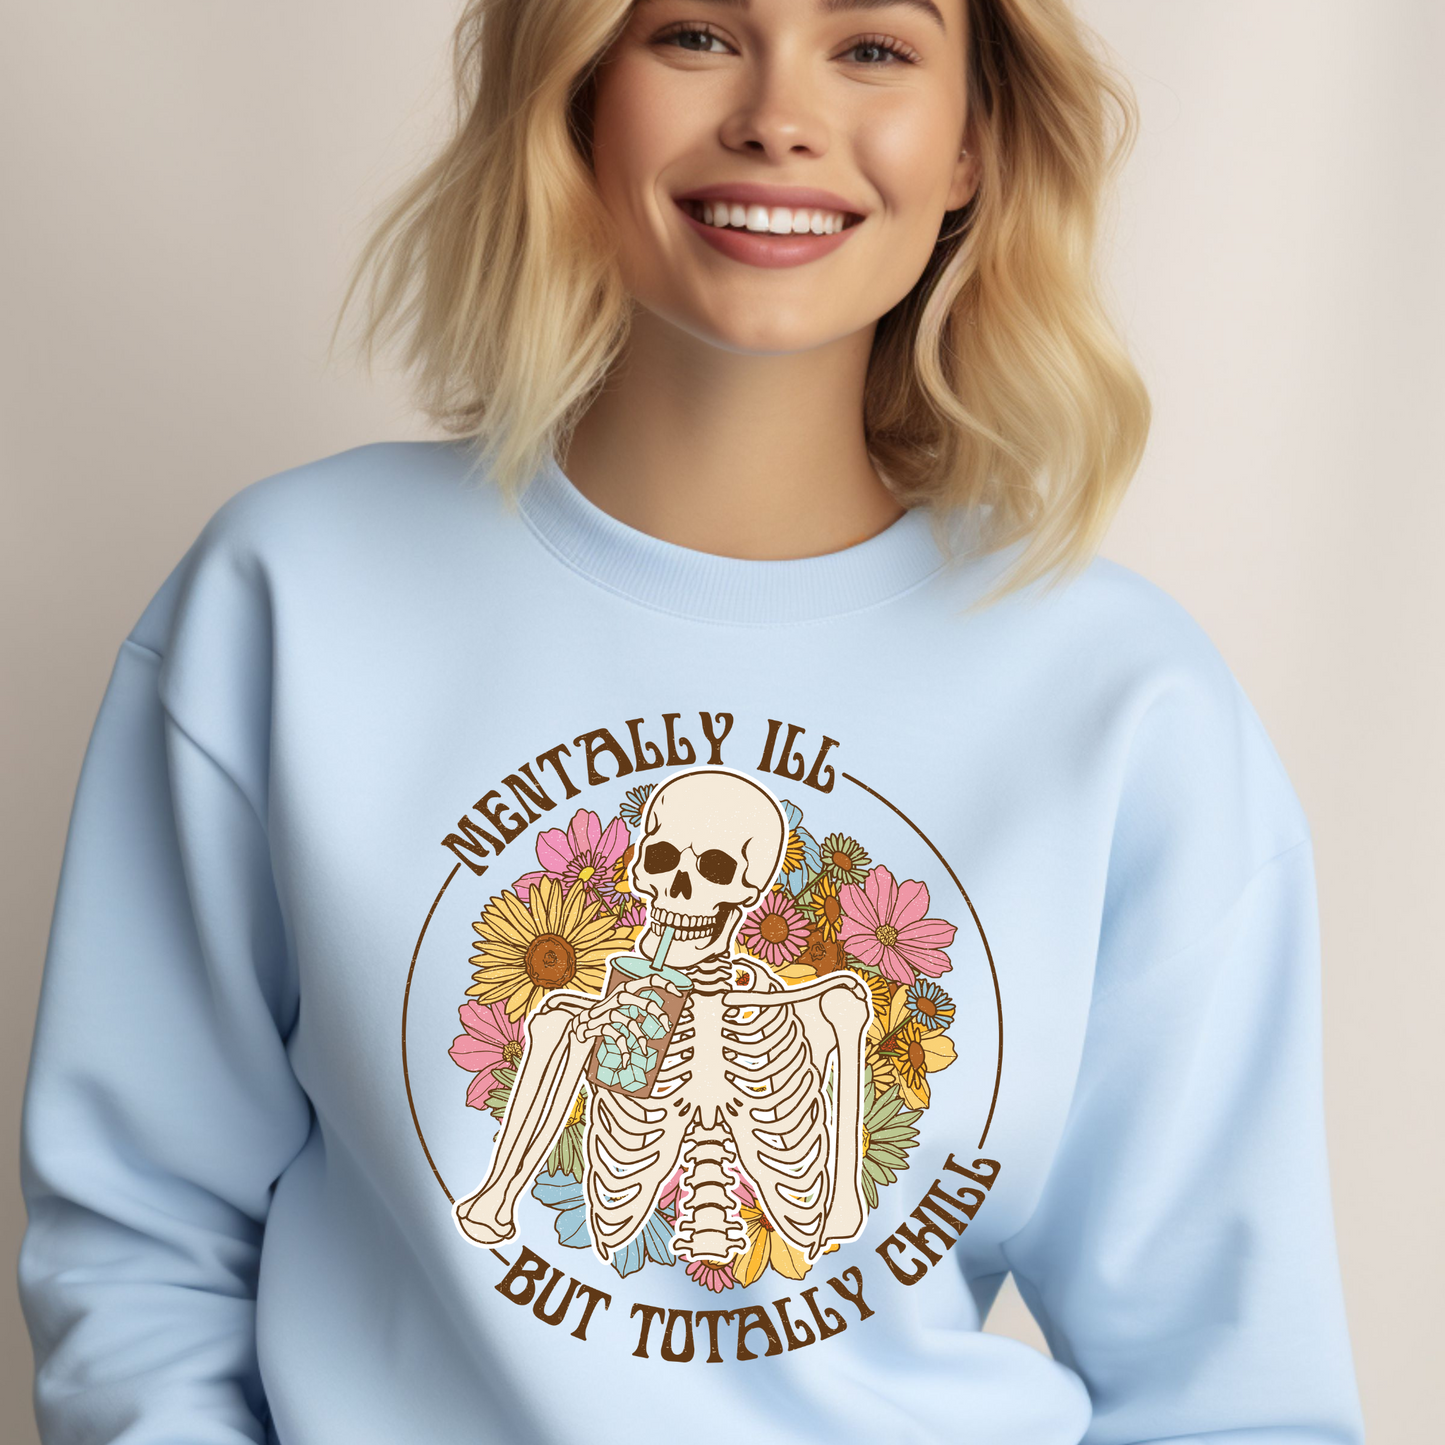 Mentally Ill but totally chill crewneck sweater